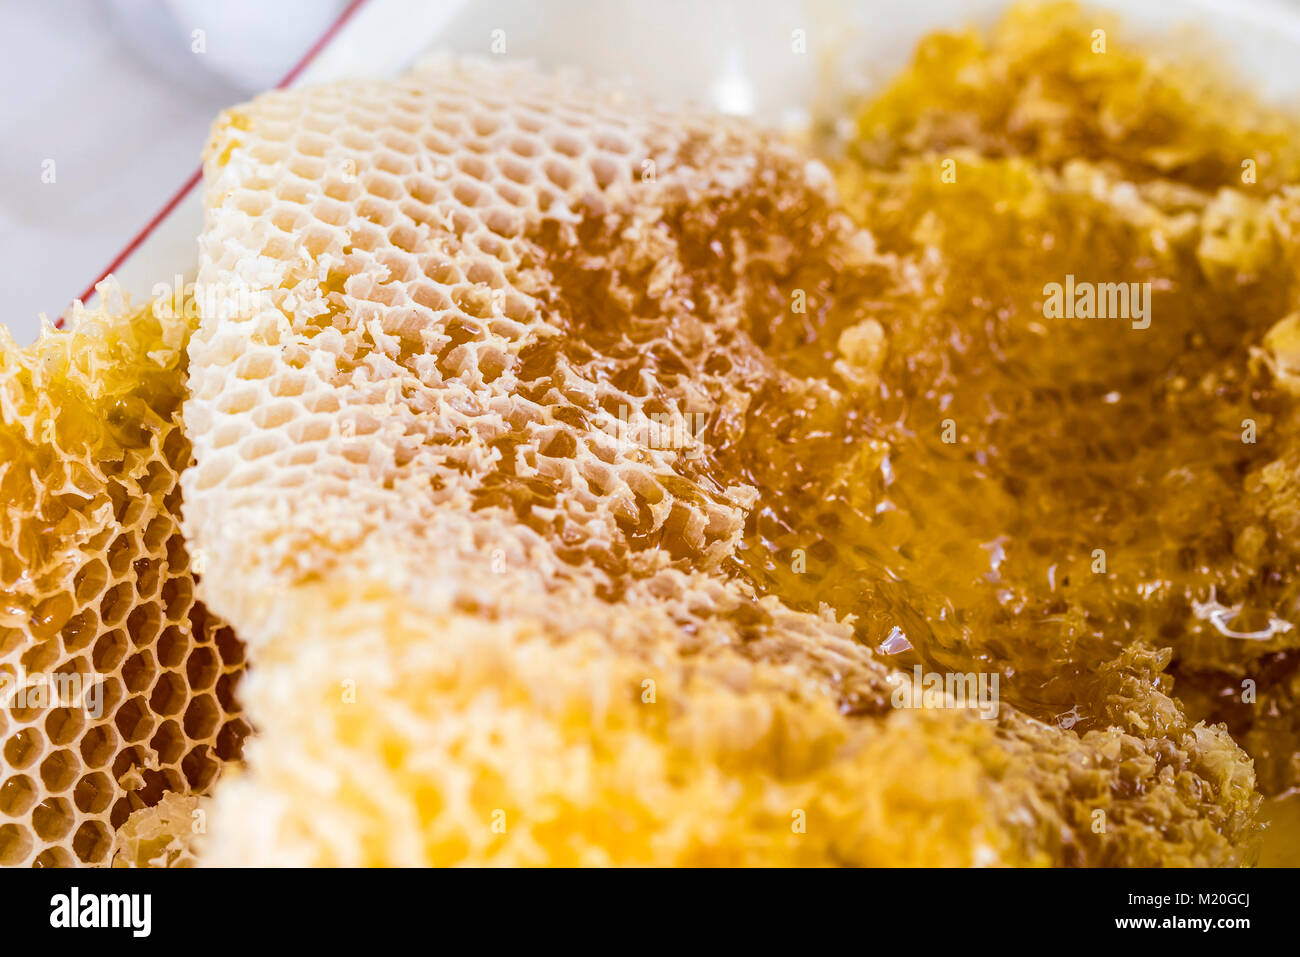 Natural Honeycomb with honey, macro, closeup, full frame. Comb honey, beeswax cells, unprocessed, golden yellow. Stock Photo